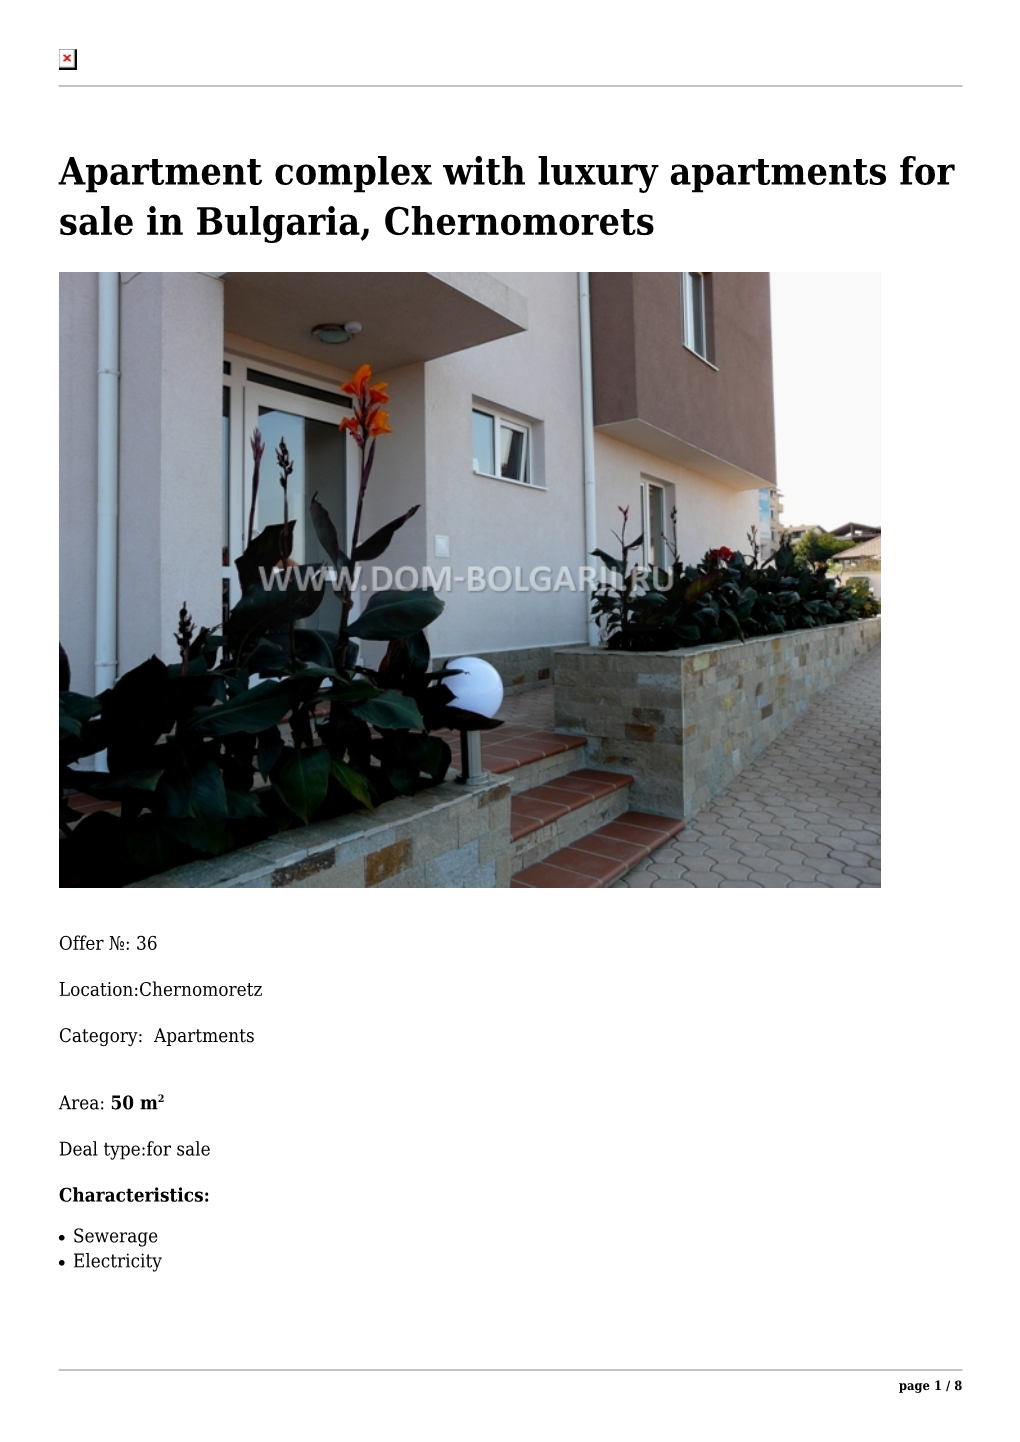 Apartment Complex with Luxury Apartments for Sale in Bulgaria, Chernomorets